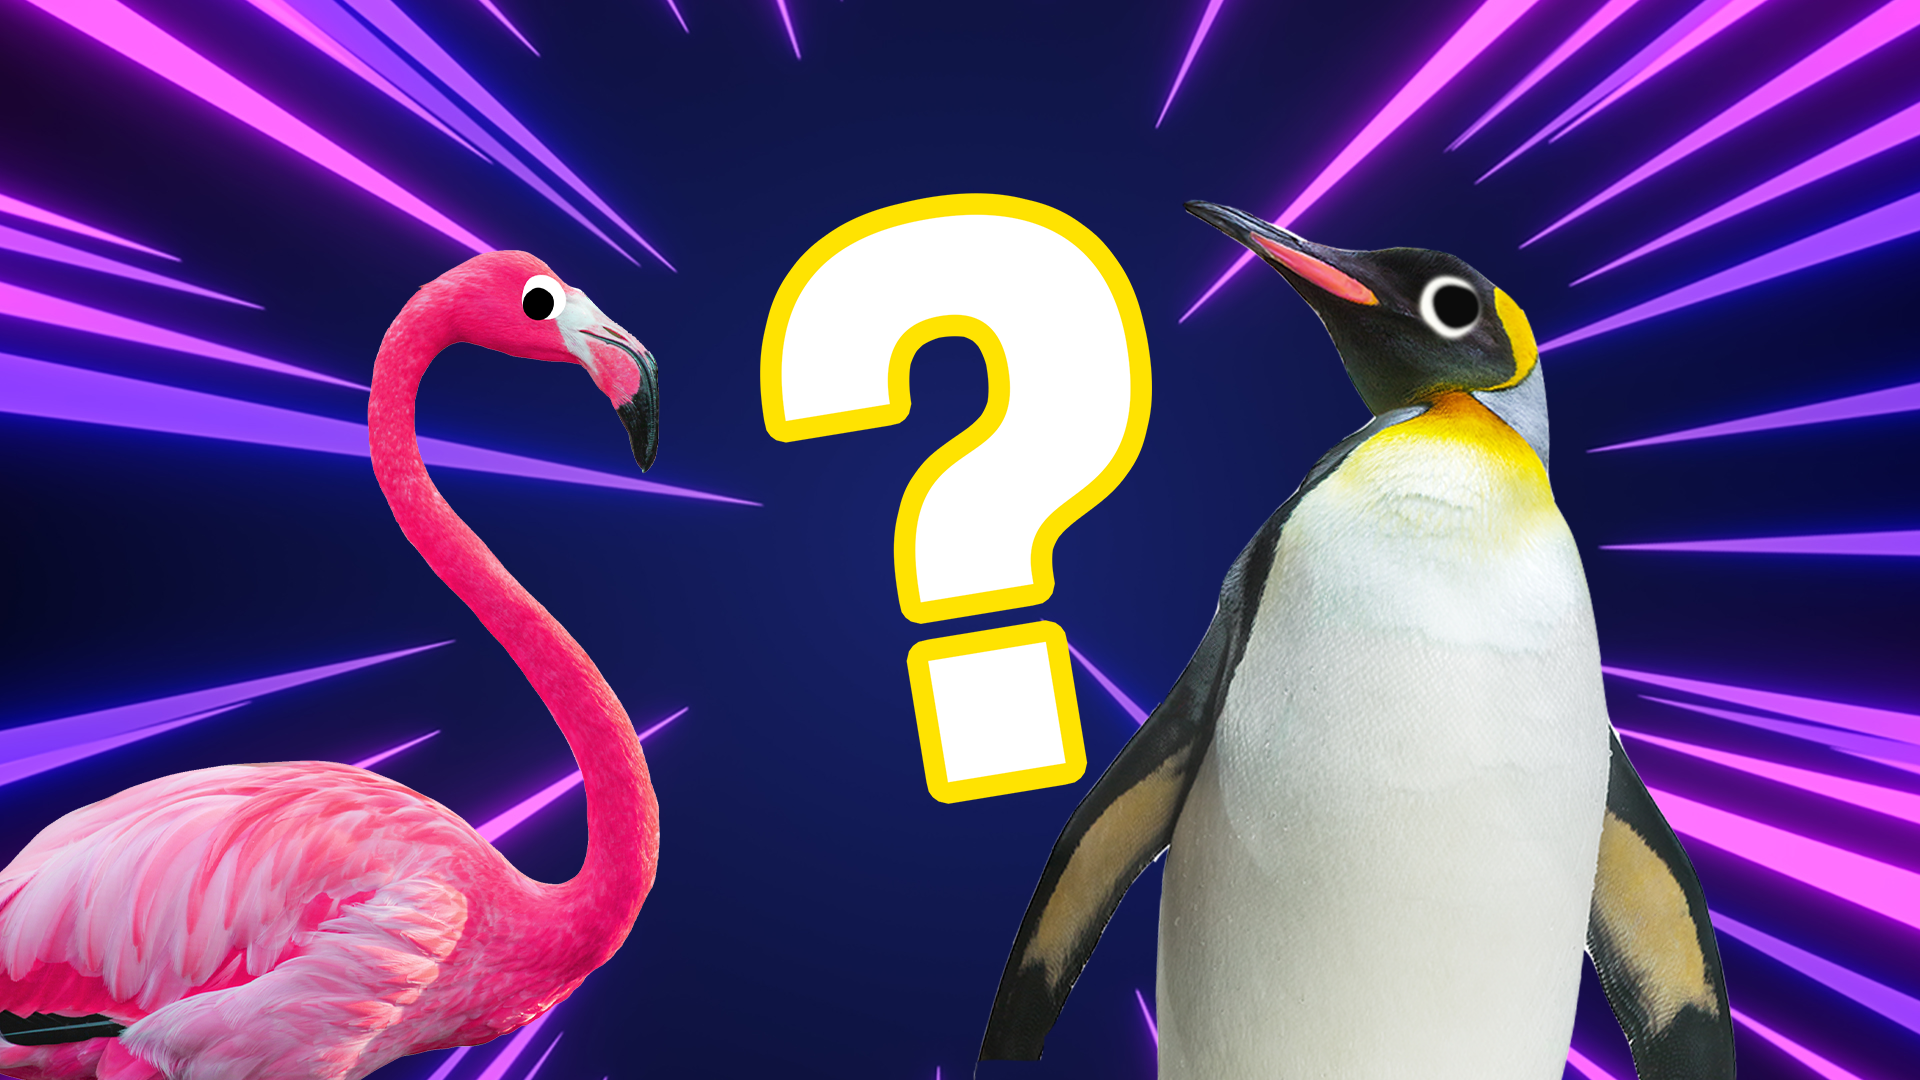 Penguin and flamingo with question mark on laser background